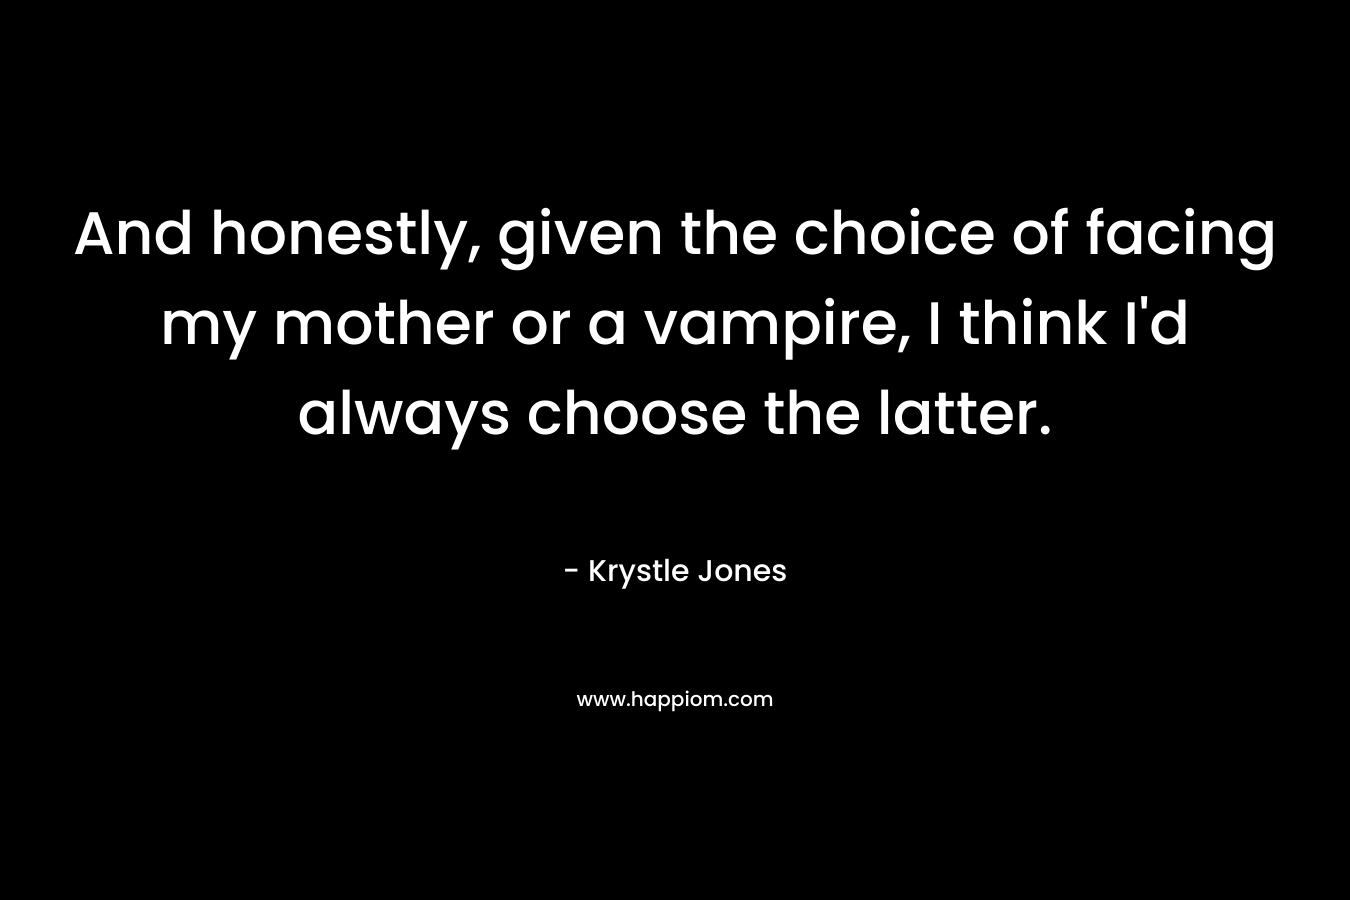 And honestly, given the choice of facing my mother or a vampire, I think I'd always choose the latter.